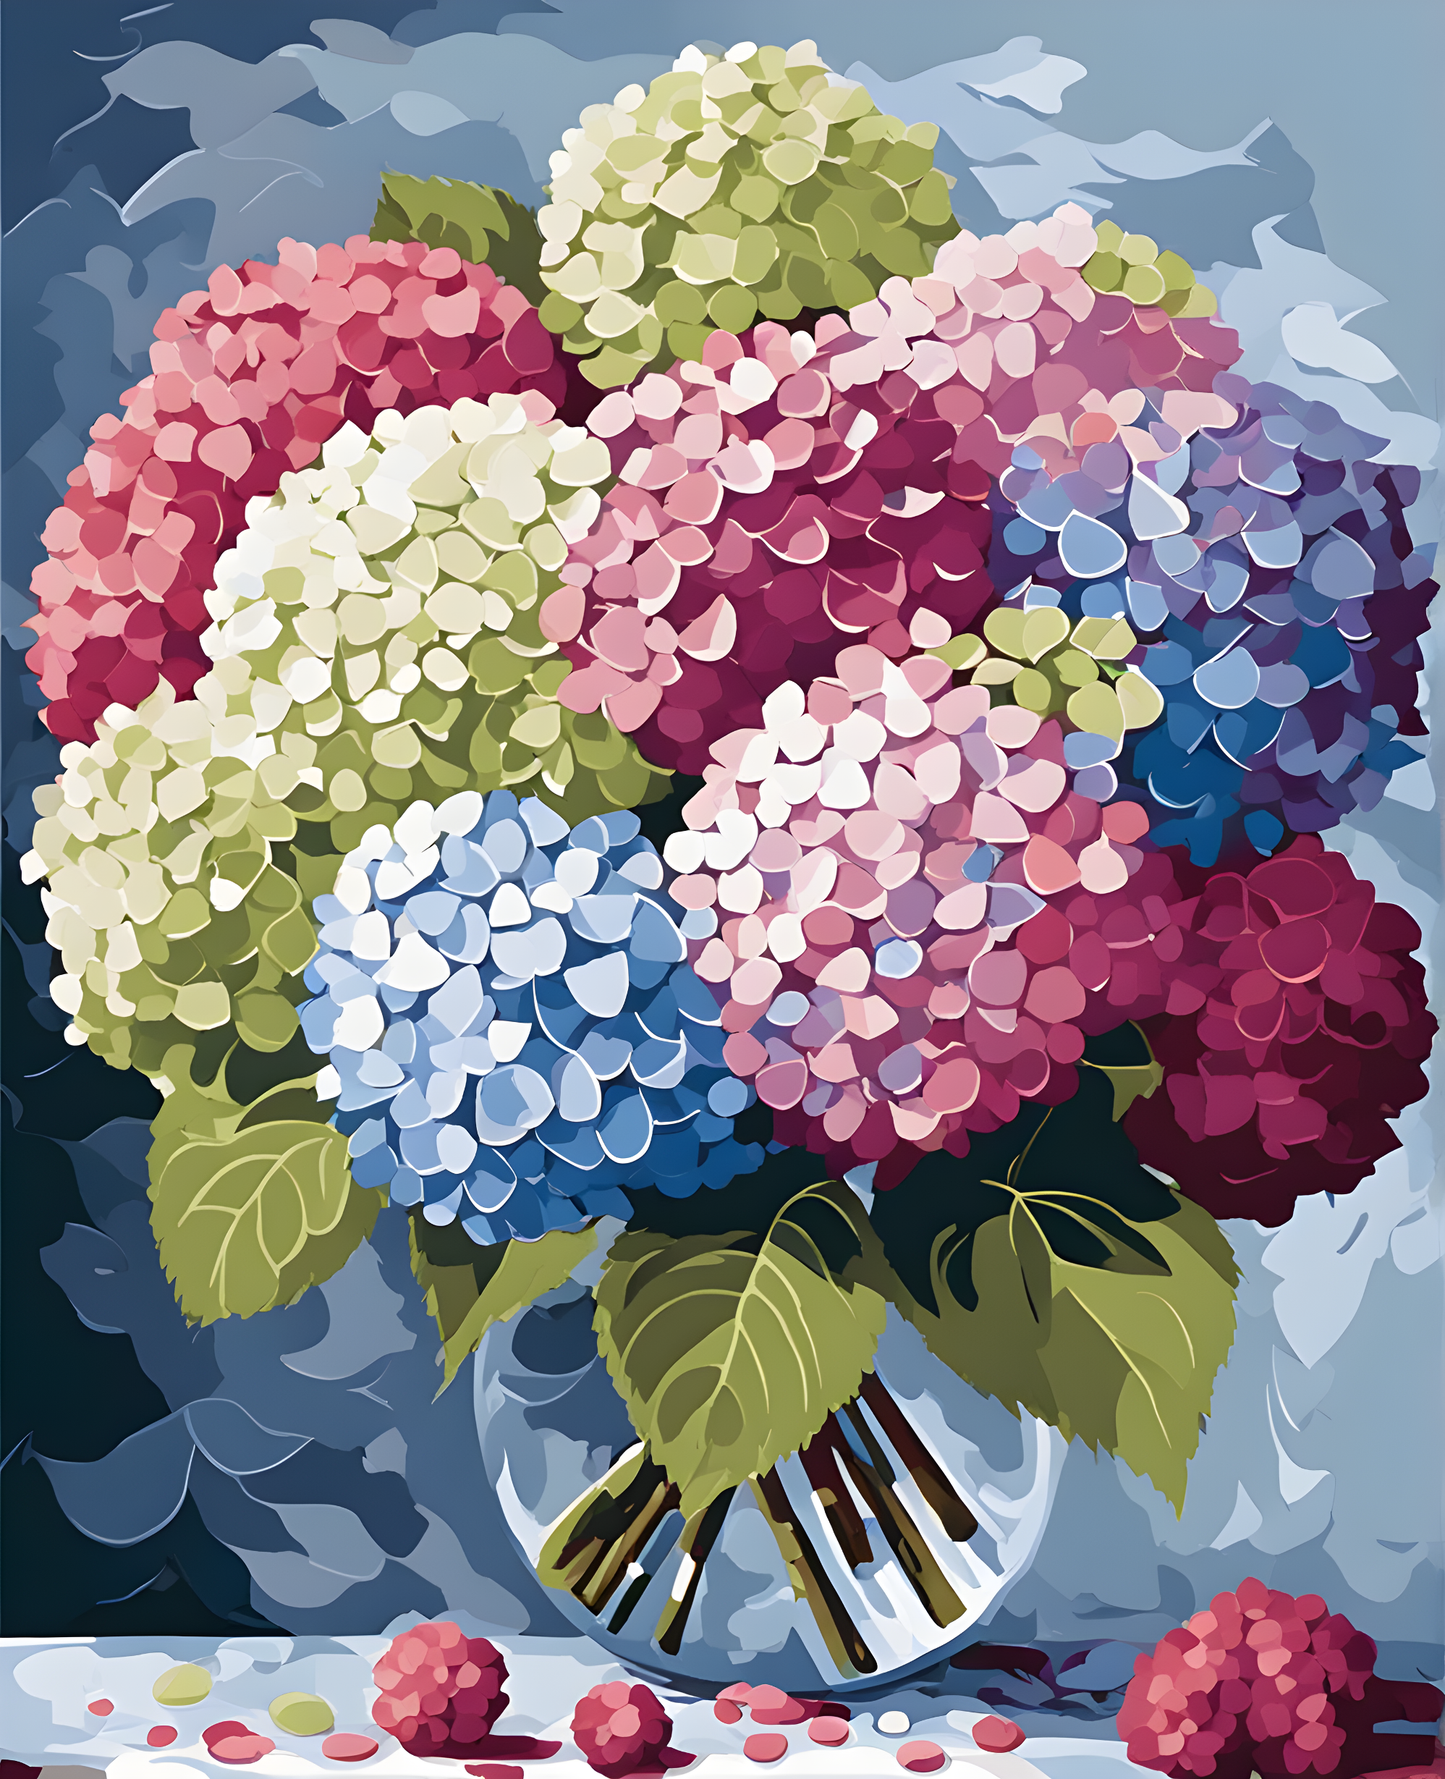 Flowers Collection OD (10) - Hydrangea - Van-Go Paint-By-Number Kit